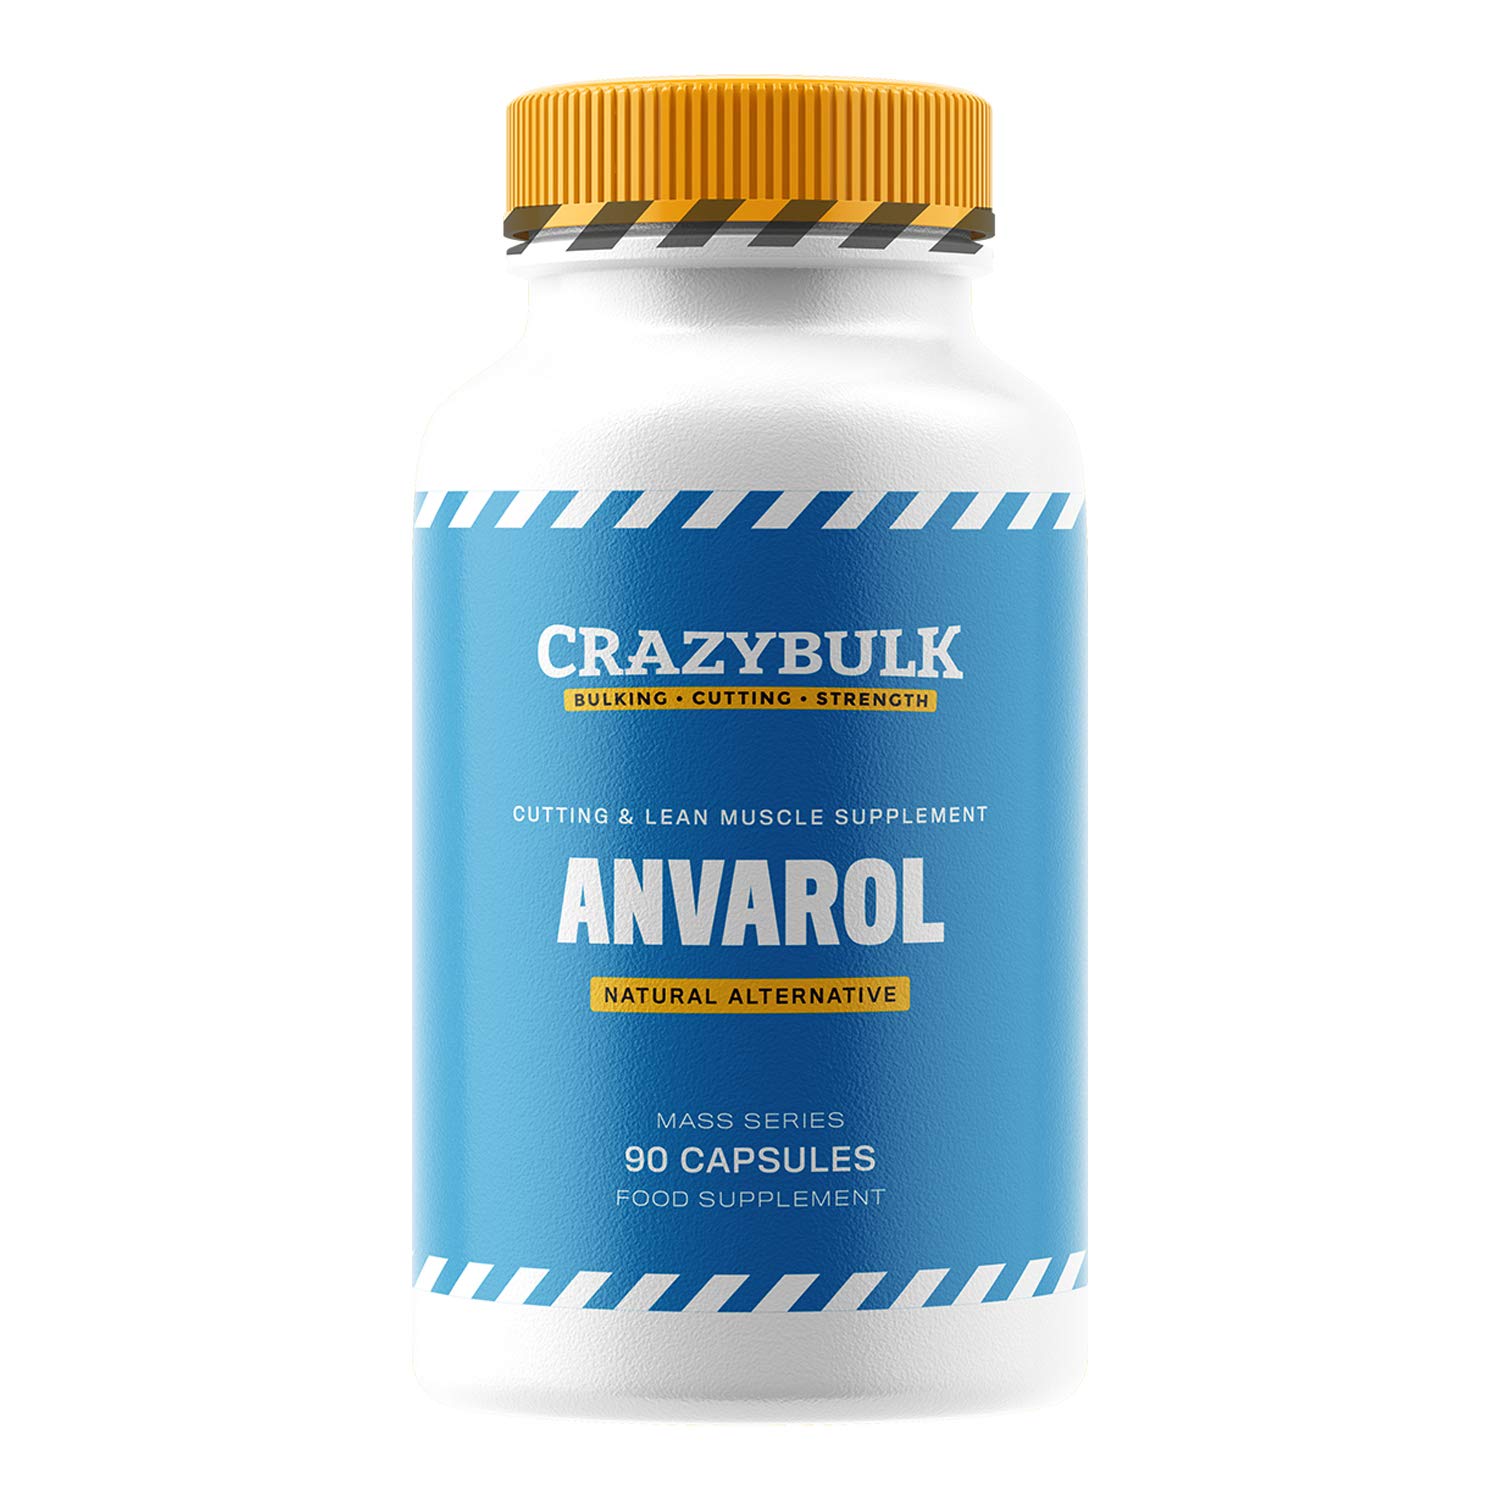 avarol - Does Anavar Affect the Menstrual Cycle?